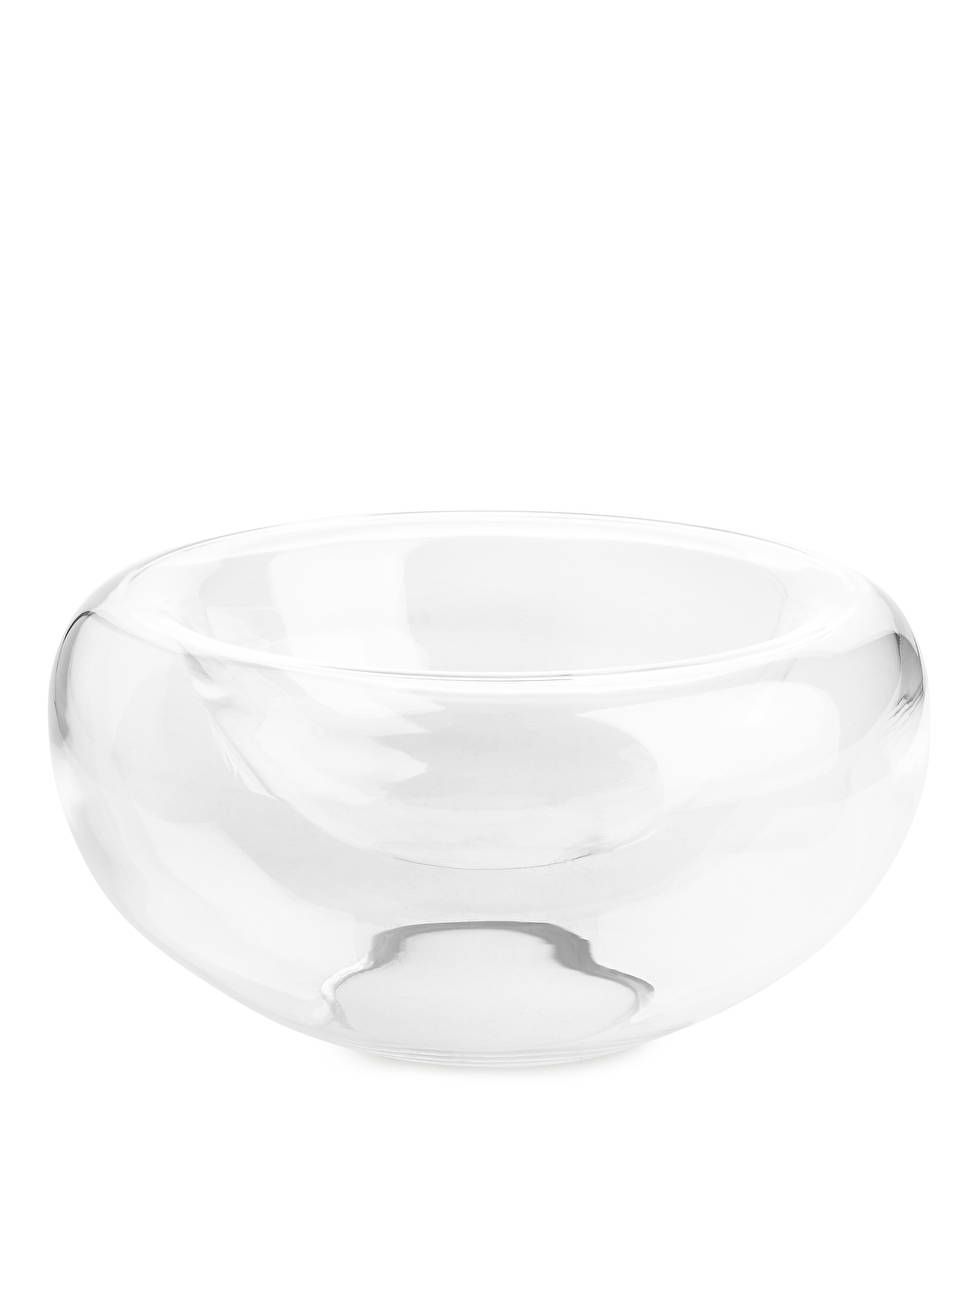 Doubled Glass Bowl | ARKET